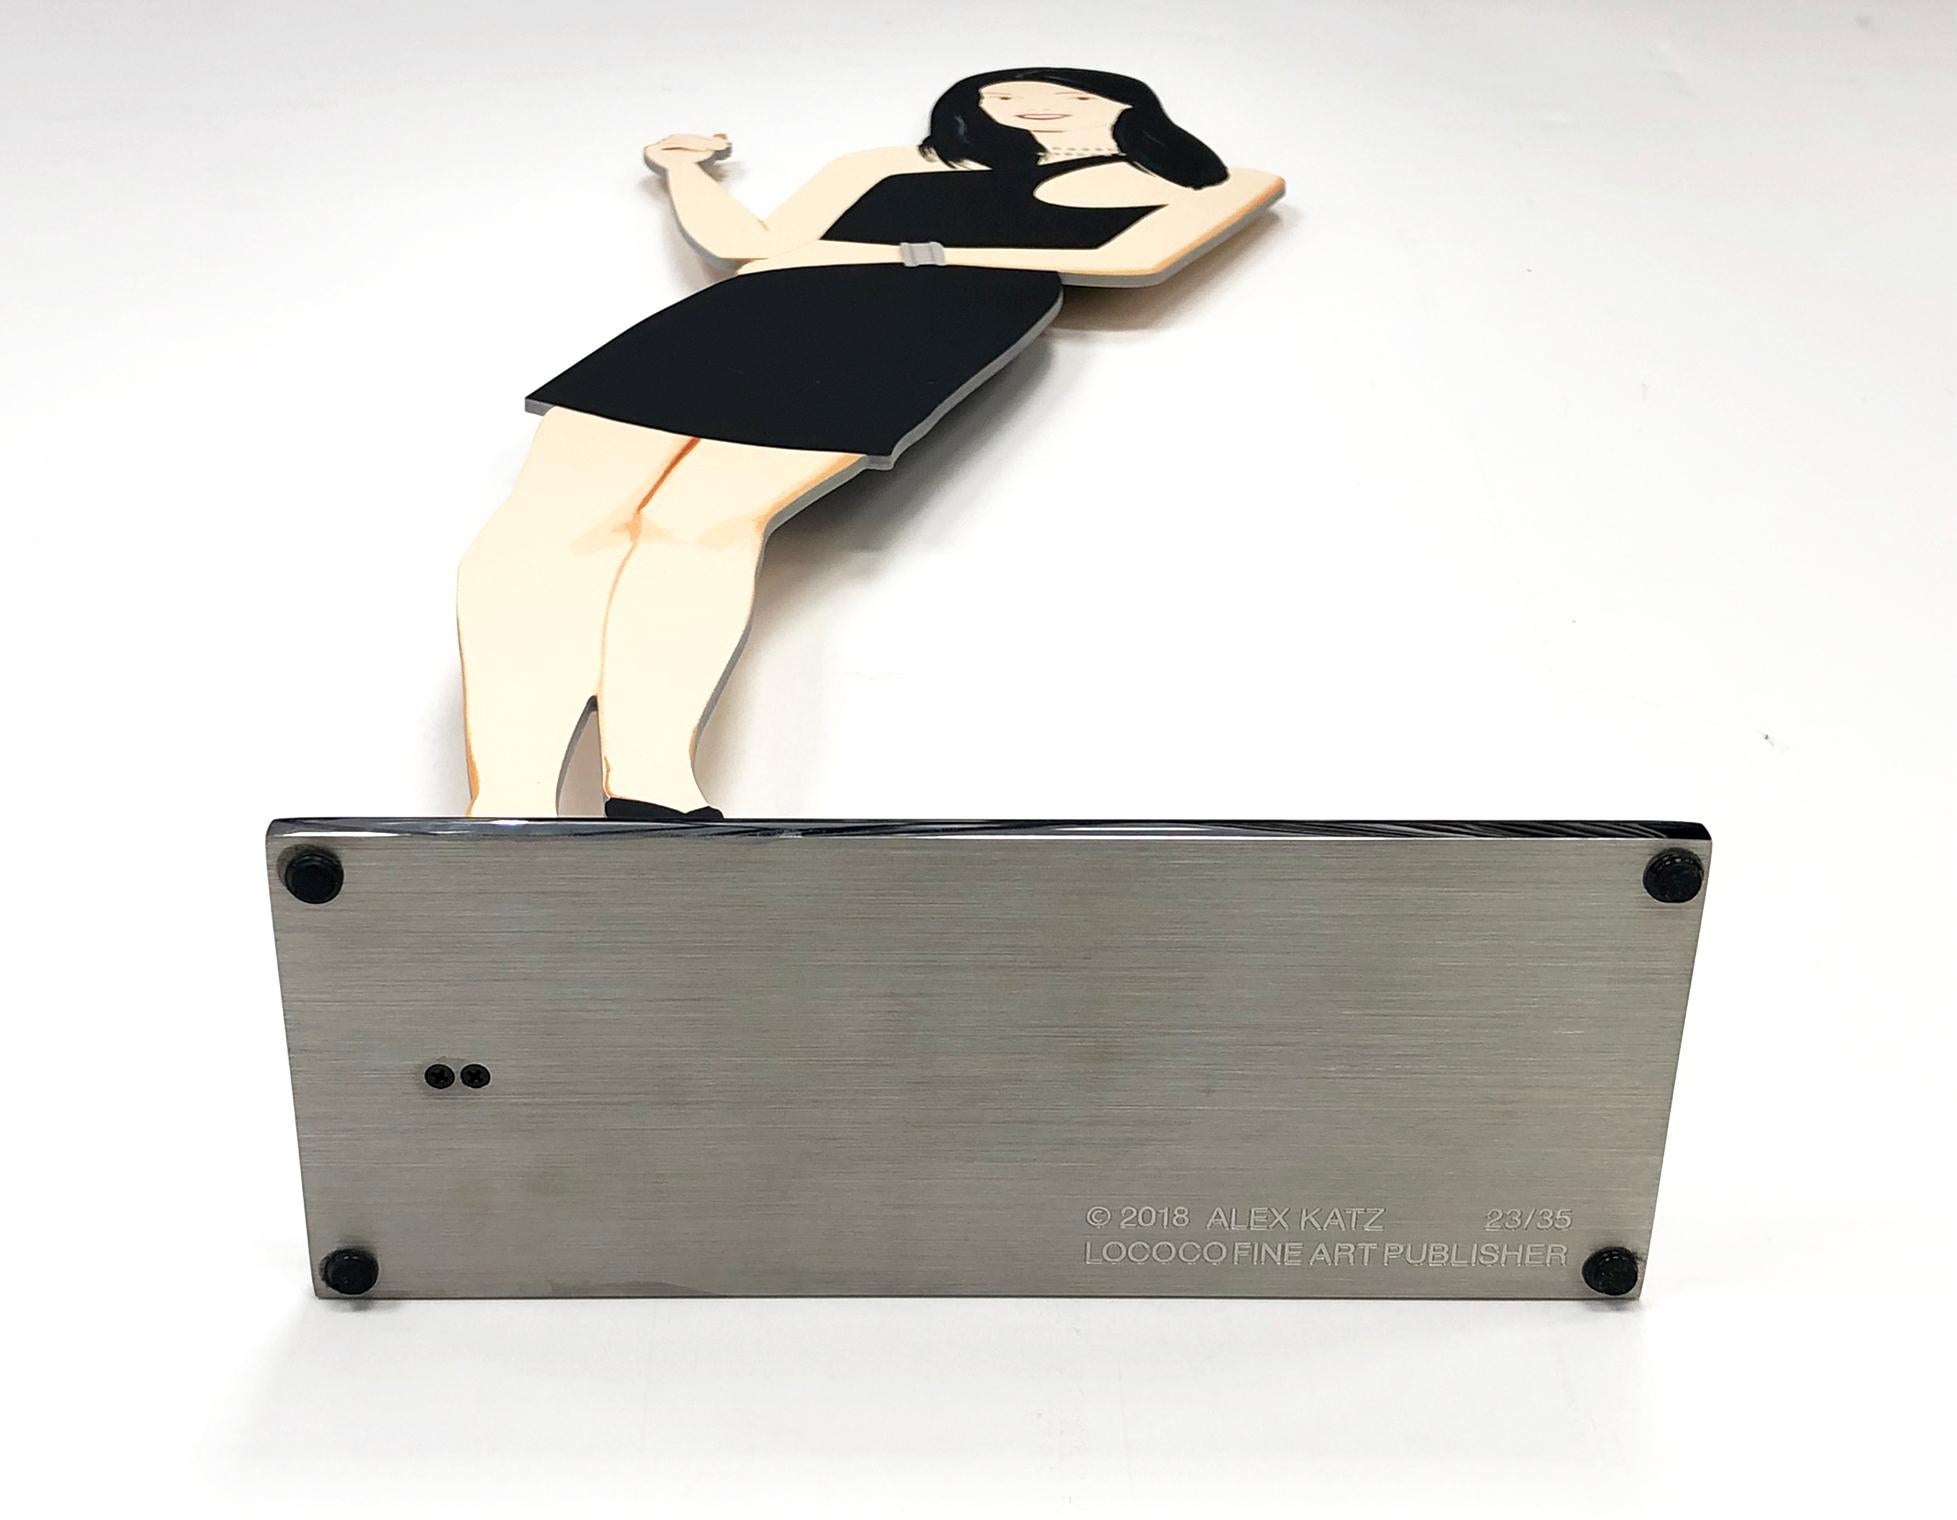 From Black Dress portfolio. Cutouts from shaped powder-coated aluminum, printed the same on each side with UV cured archival inks, clear coated, and mounted to 1/4 inch stainless steel base. Incised with the artist signature on top of base; stamped